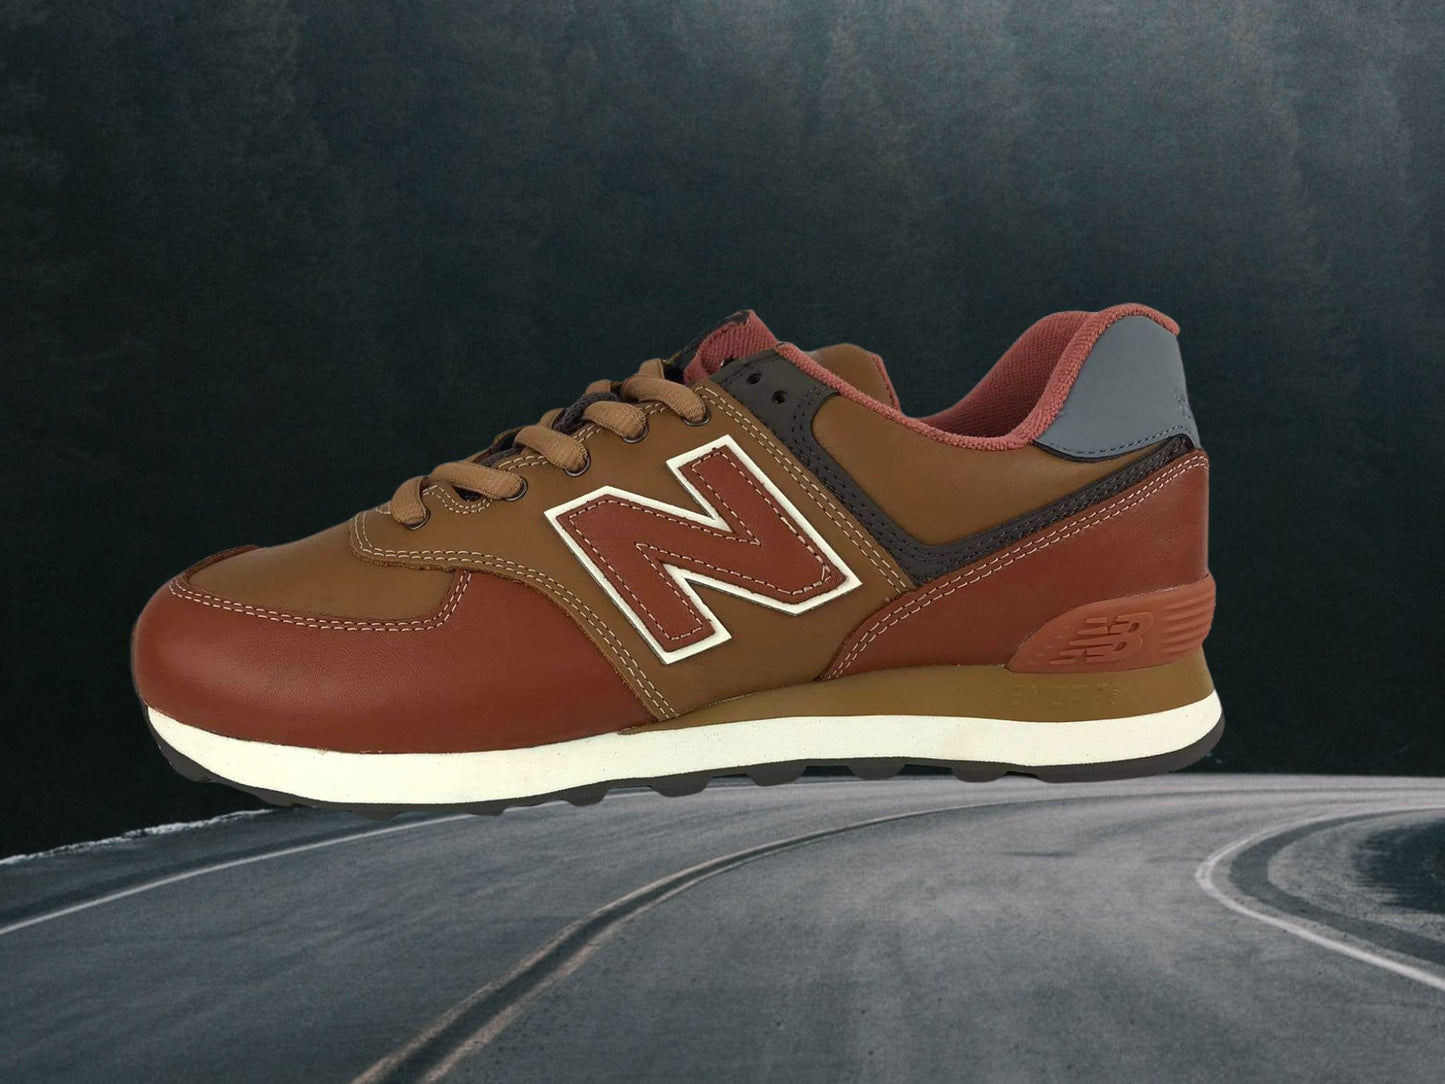 New Balance | Mauricio Boy sneakers with Leather and Mustard color laces